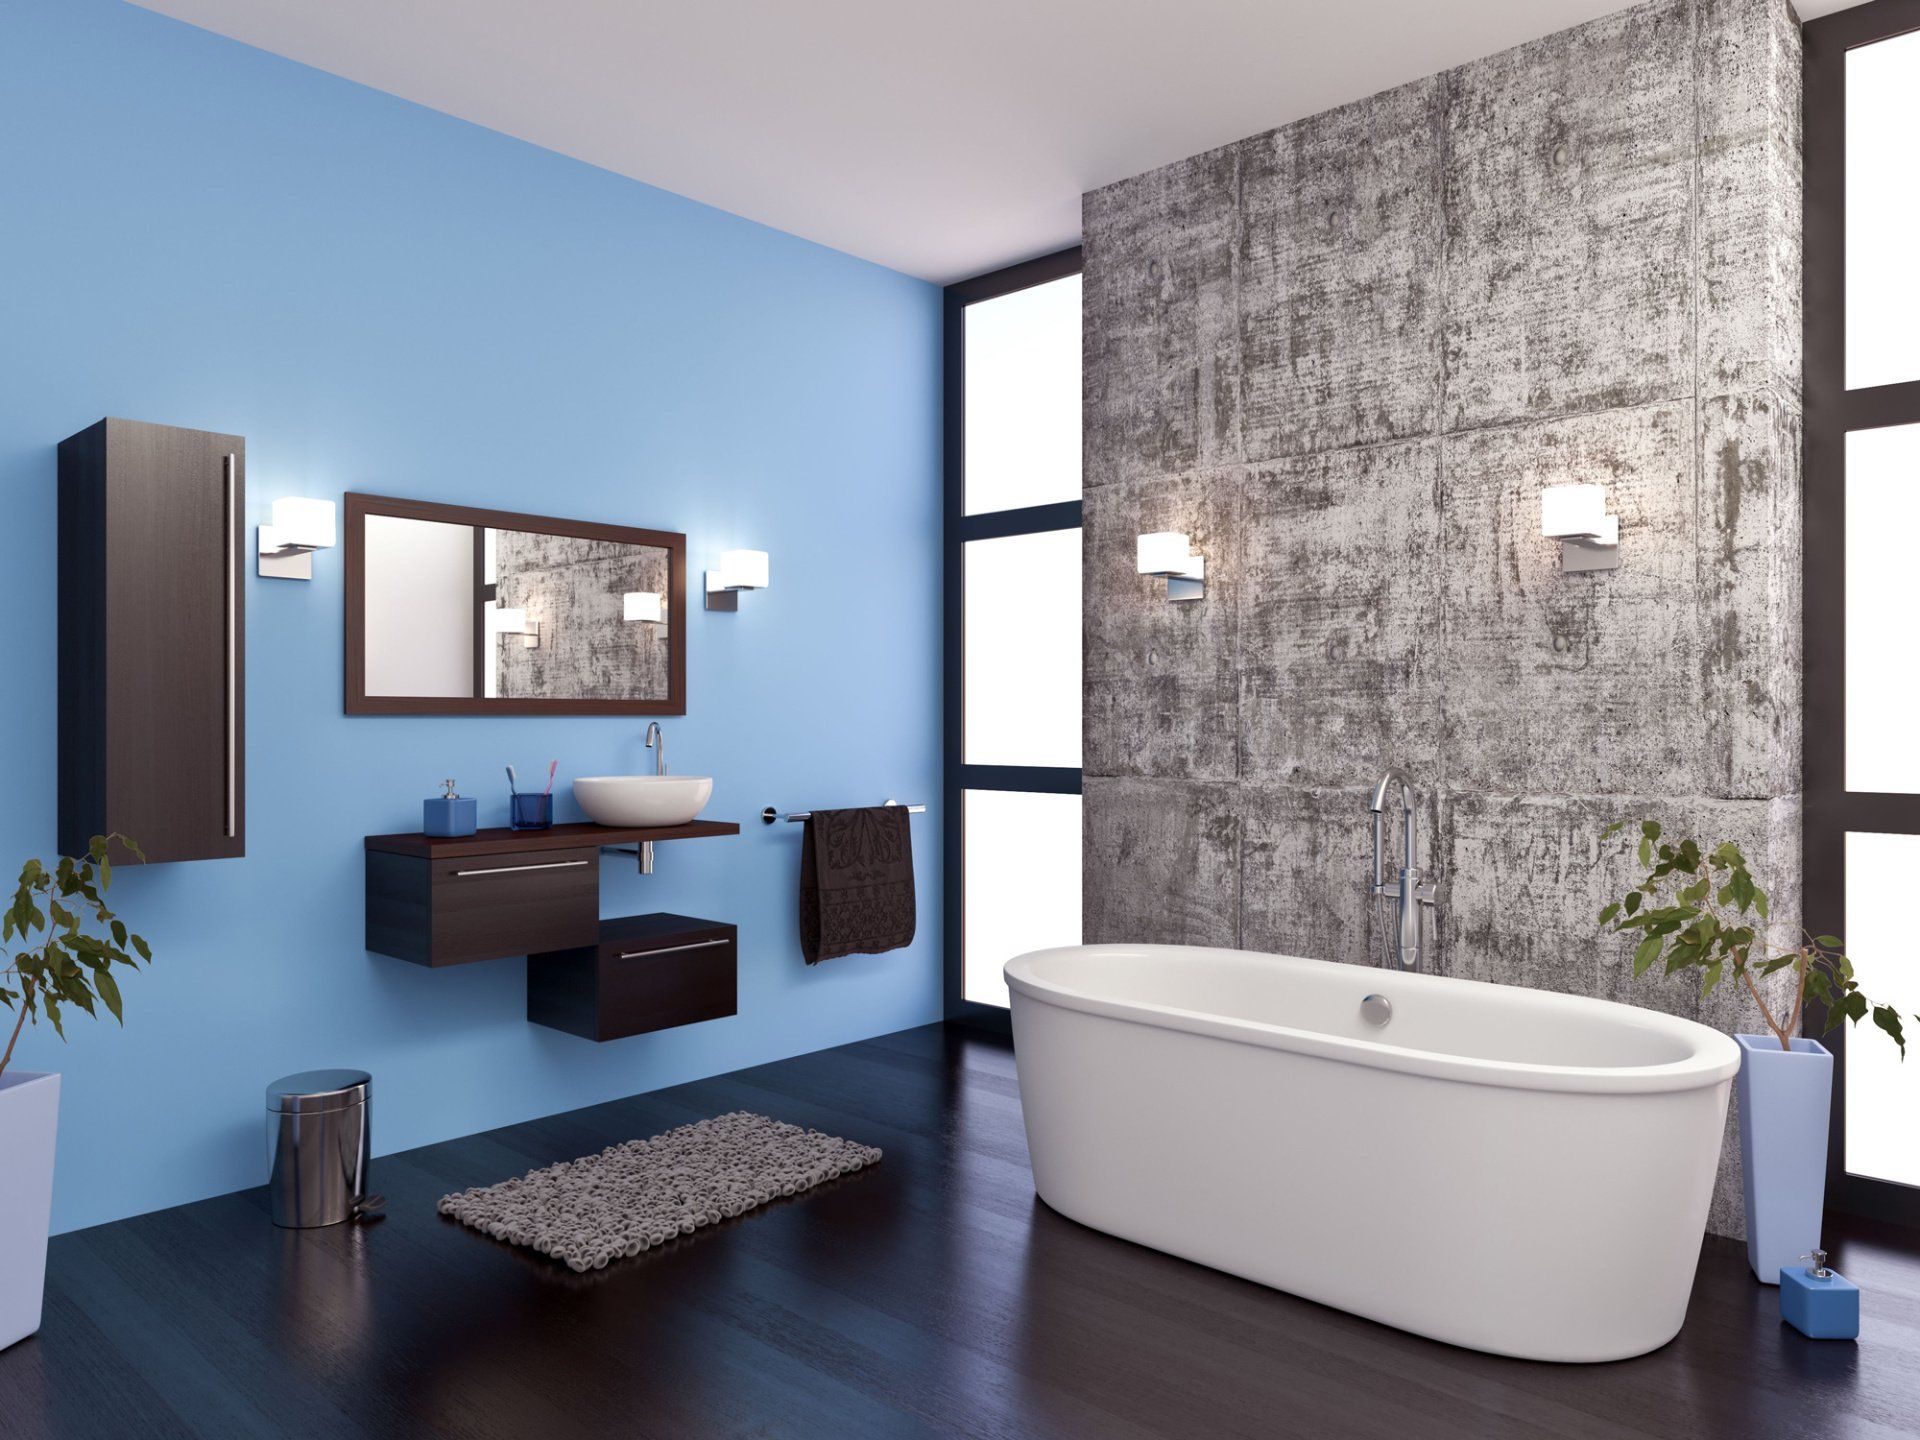 Tips for Painting Your Bathroom